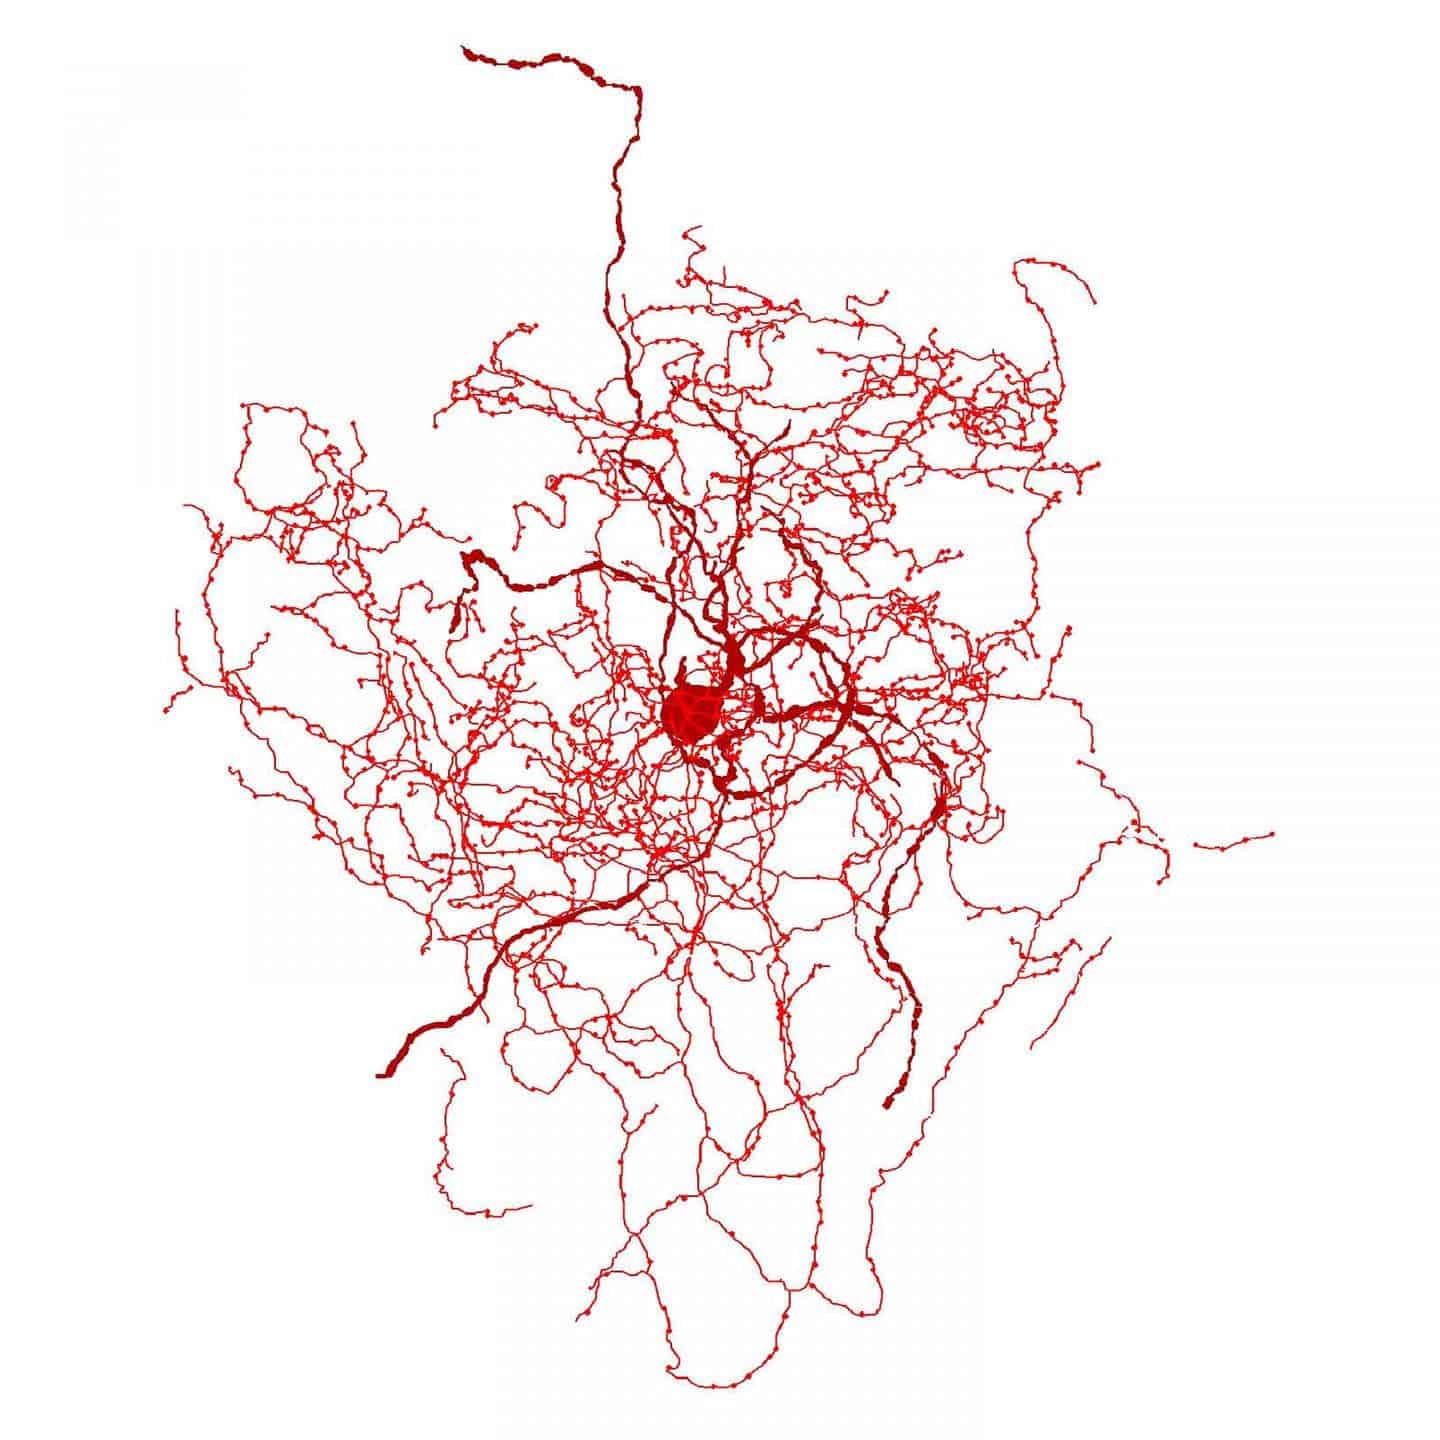 Digital reconstruction of a rosehip neuron in the human brain. Credit: Tamas Lab, University of Szeged.